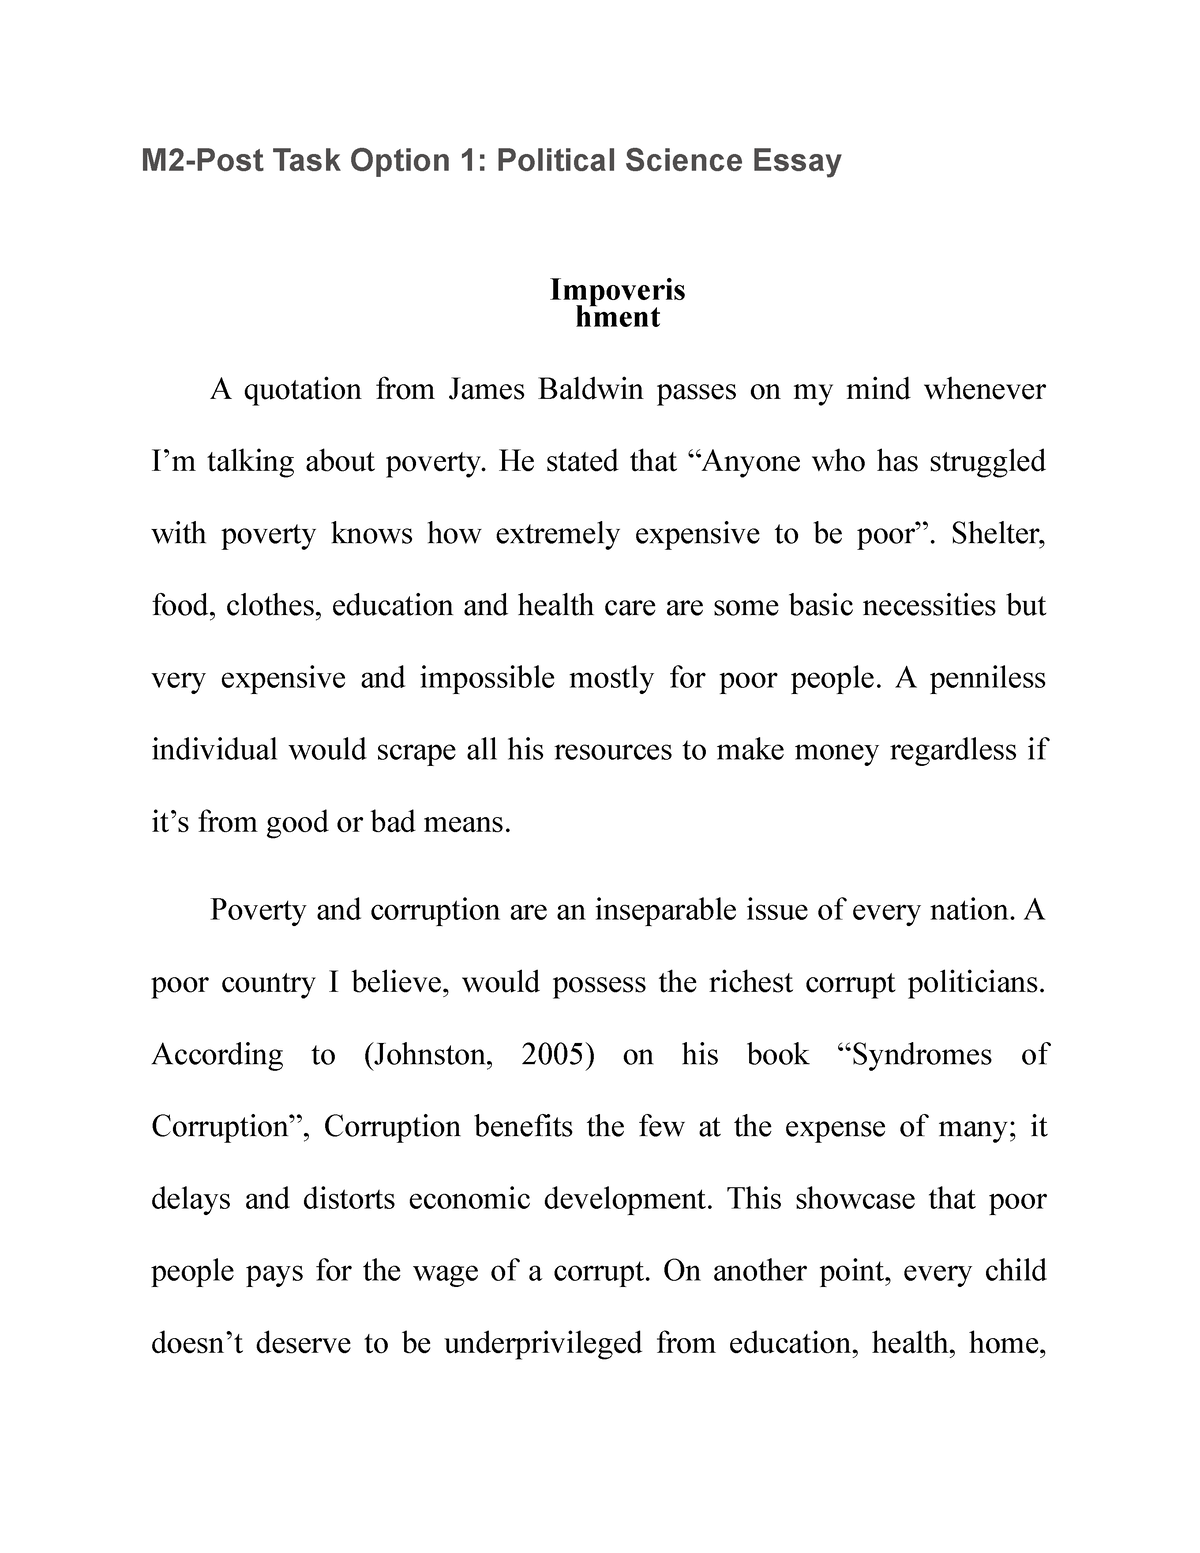 political science essay in english